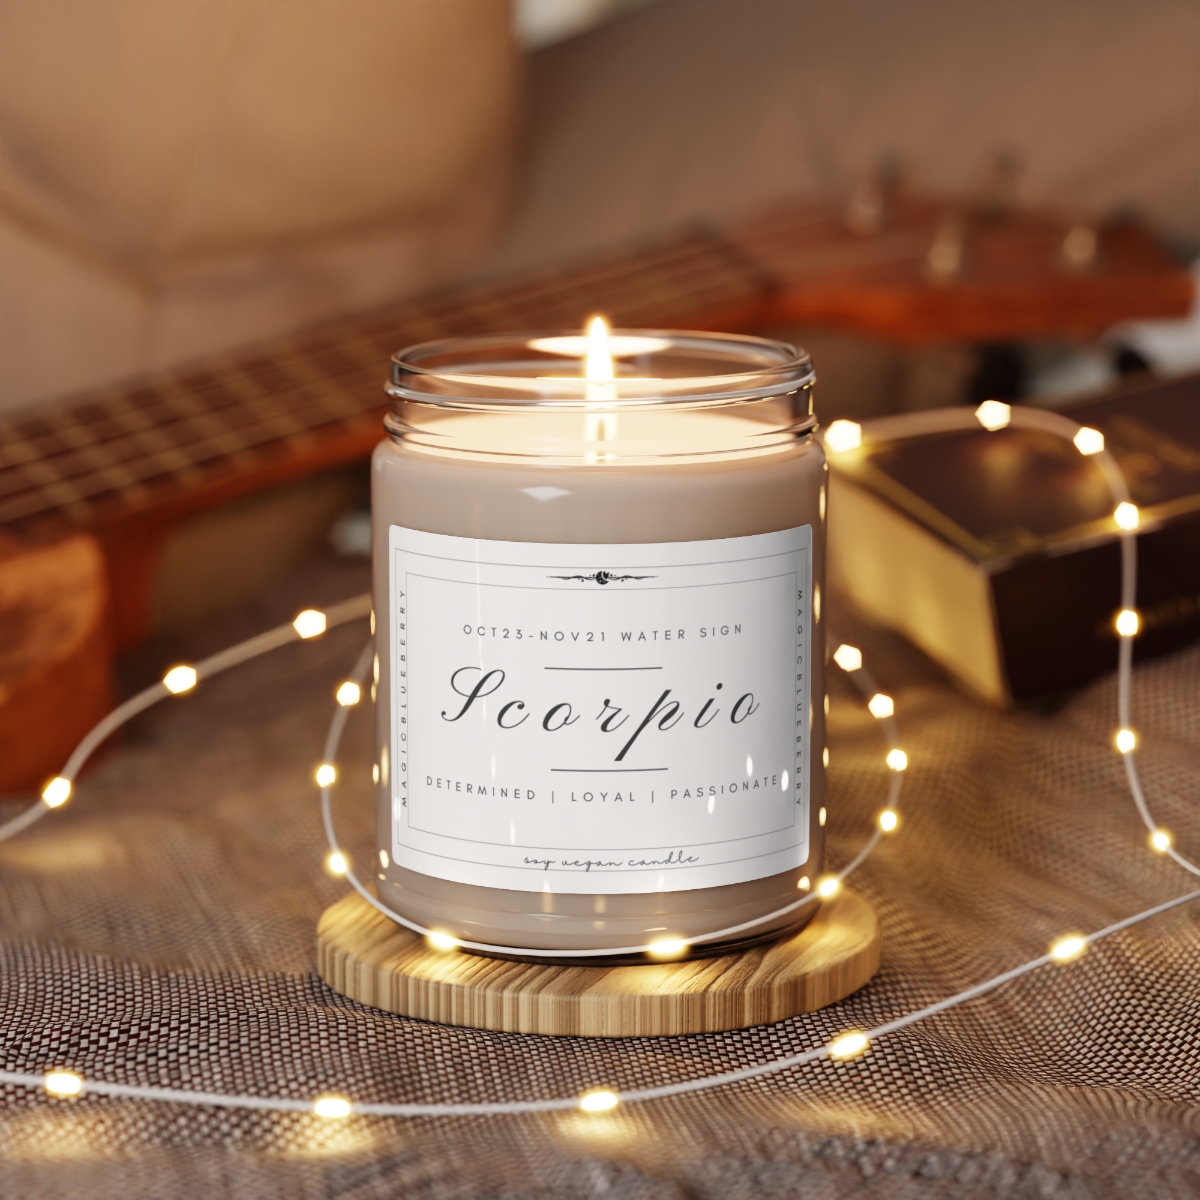 Scorpio - Scented Vegan Soy Wax Candle Clear Jar Candle, Spell Candle, Sassy Candle Vegan Candle Cotton Wick Candle Home Deco product thumbnail image